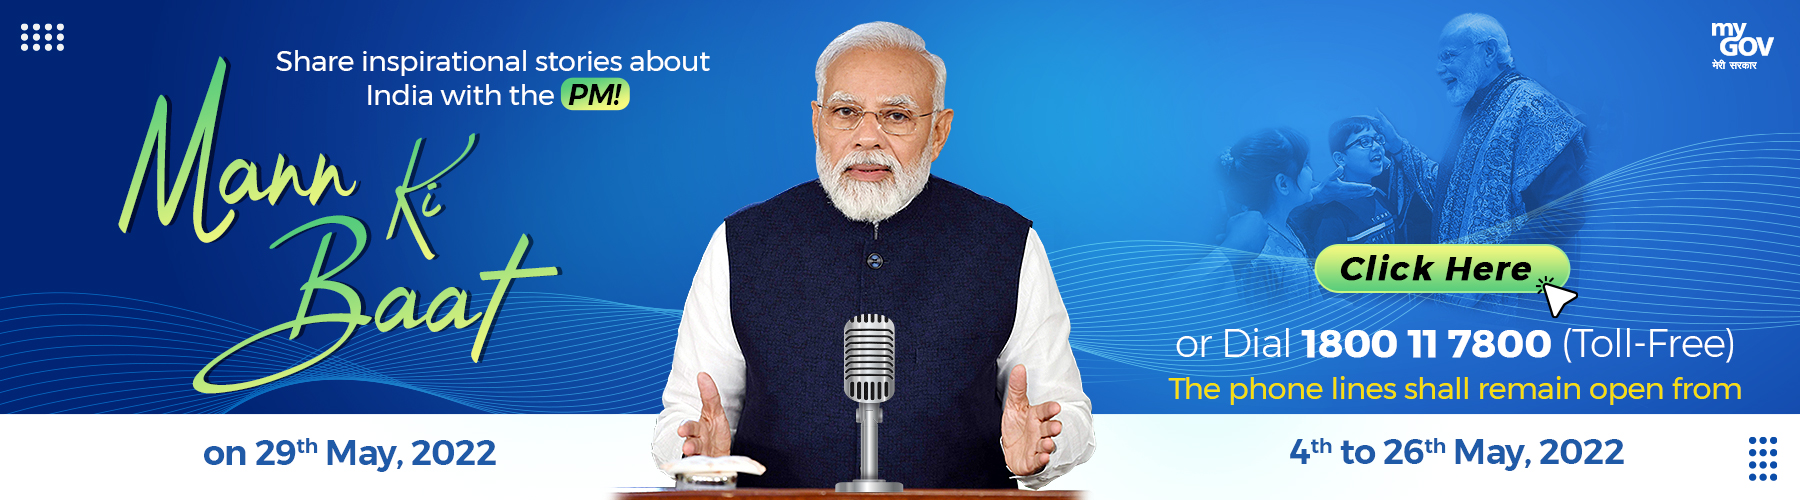 Inviting ideas for Mann Ki Baat by Prime Minister Narendra Modi on 29th May 2022